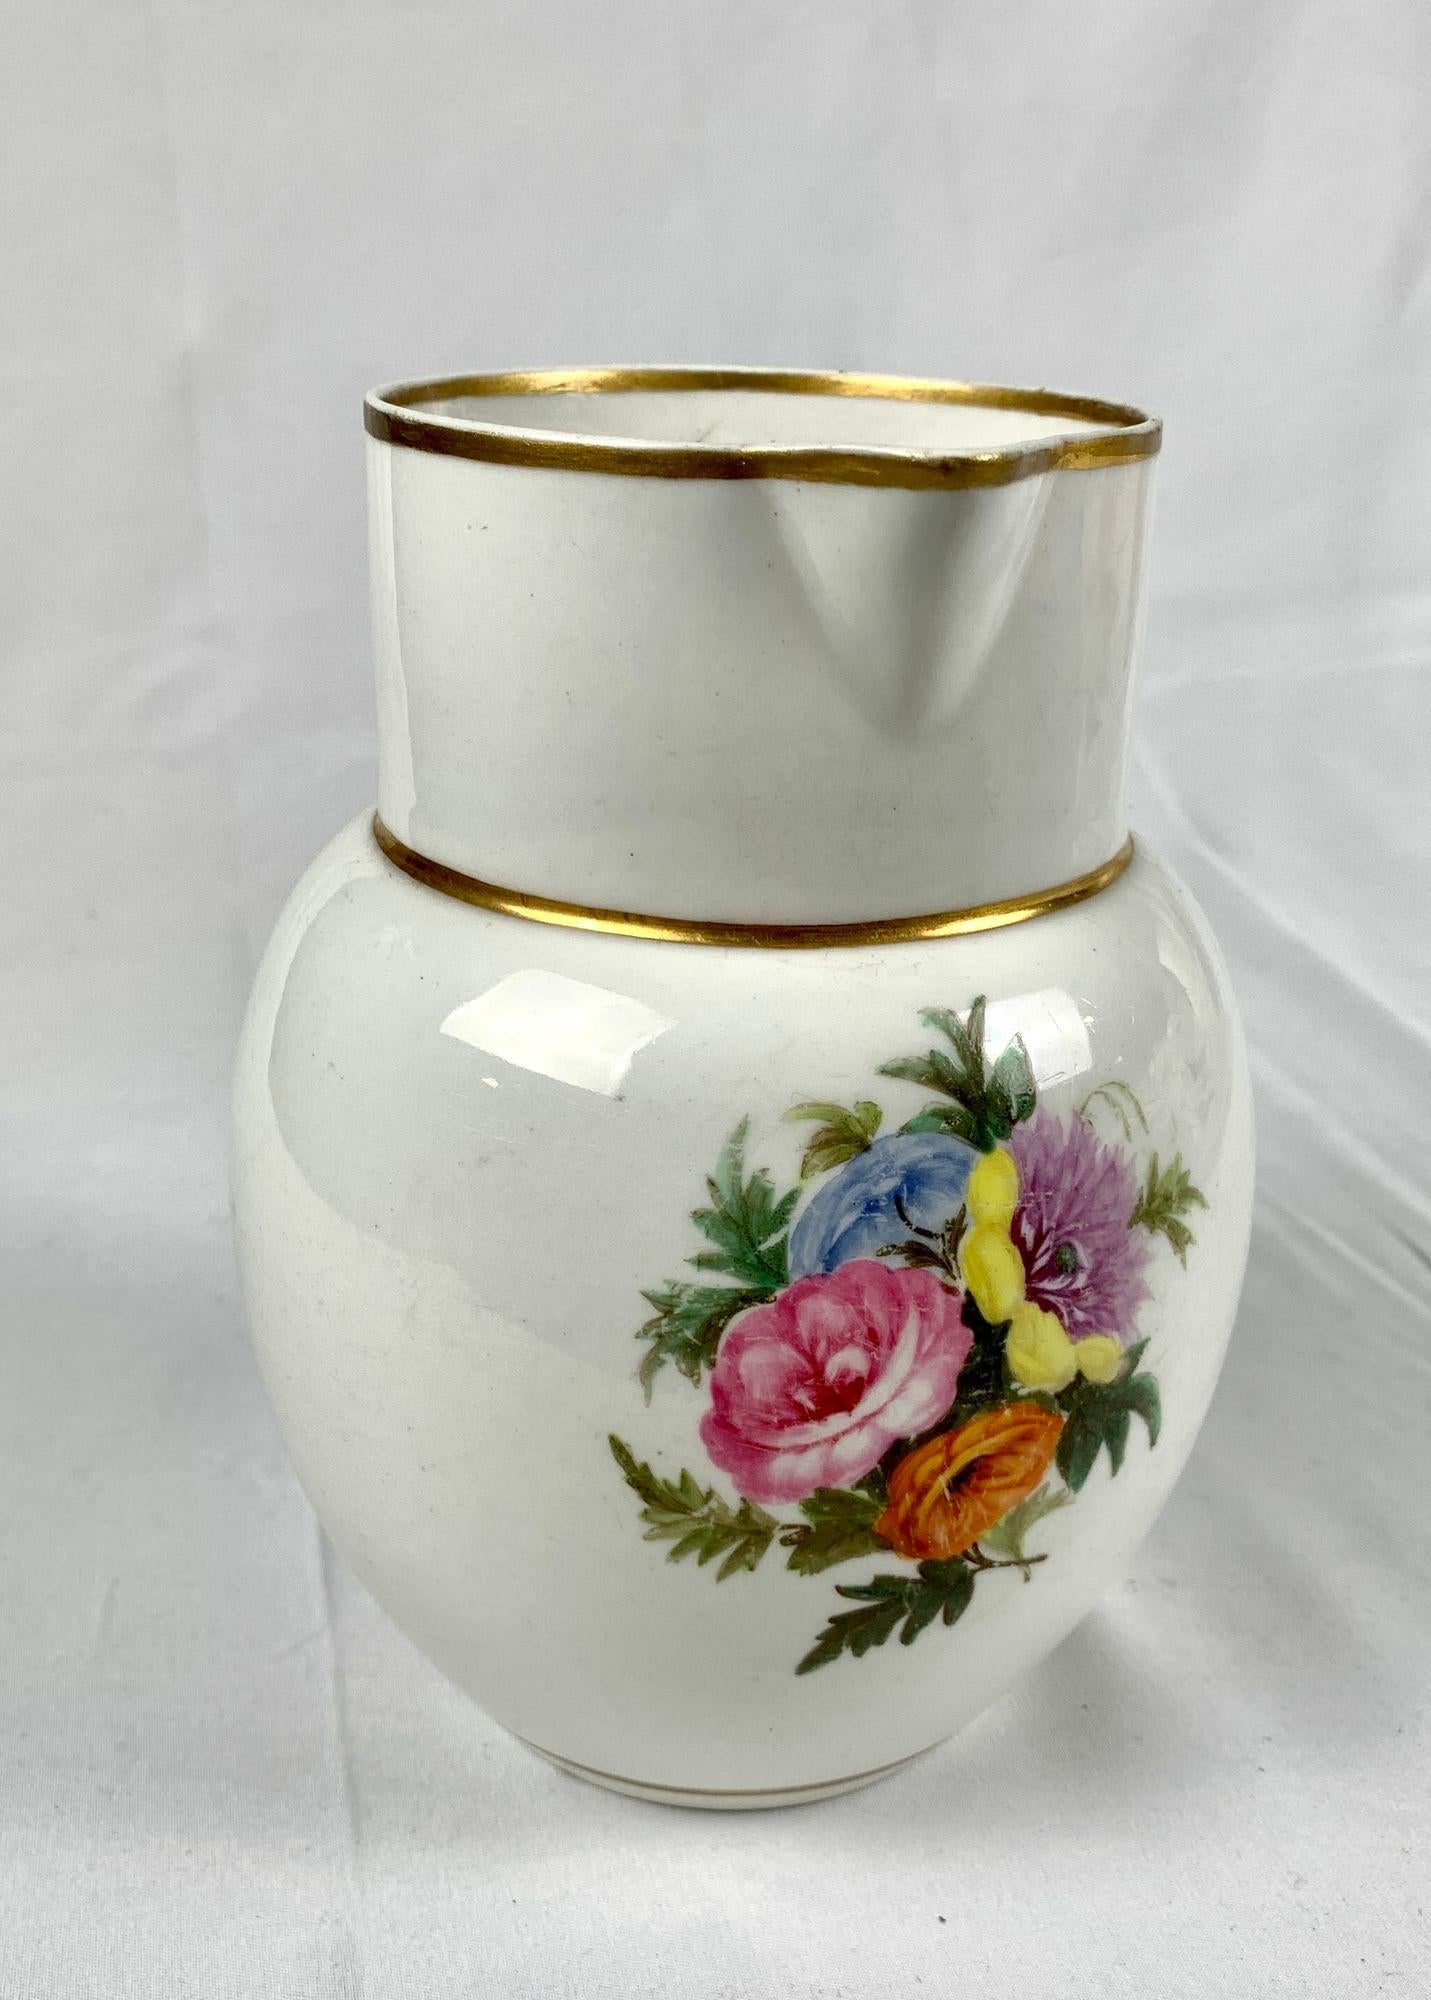 This simple, charming Staffordshire porcelain pitcher is perfect for flowers.
Made in England circa 1830, the pitcher has a beautiful hand painted bouquet on the front.
We see colors of pink, light blue, yellow, purple, orange, and two tones of